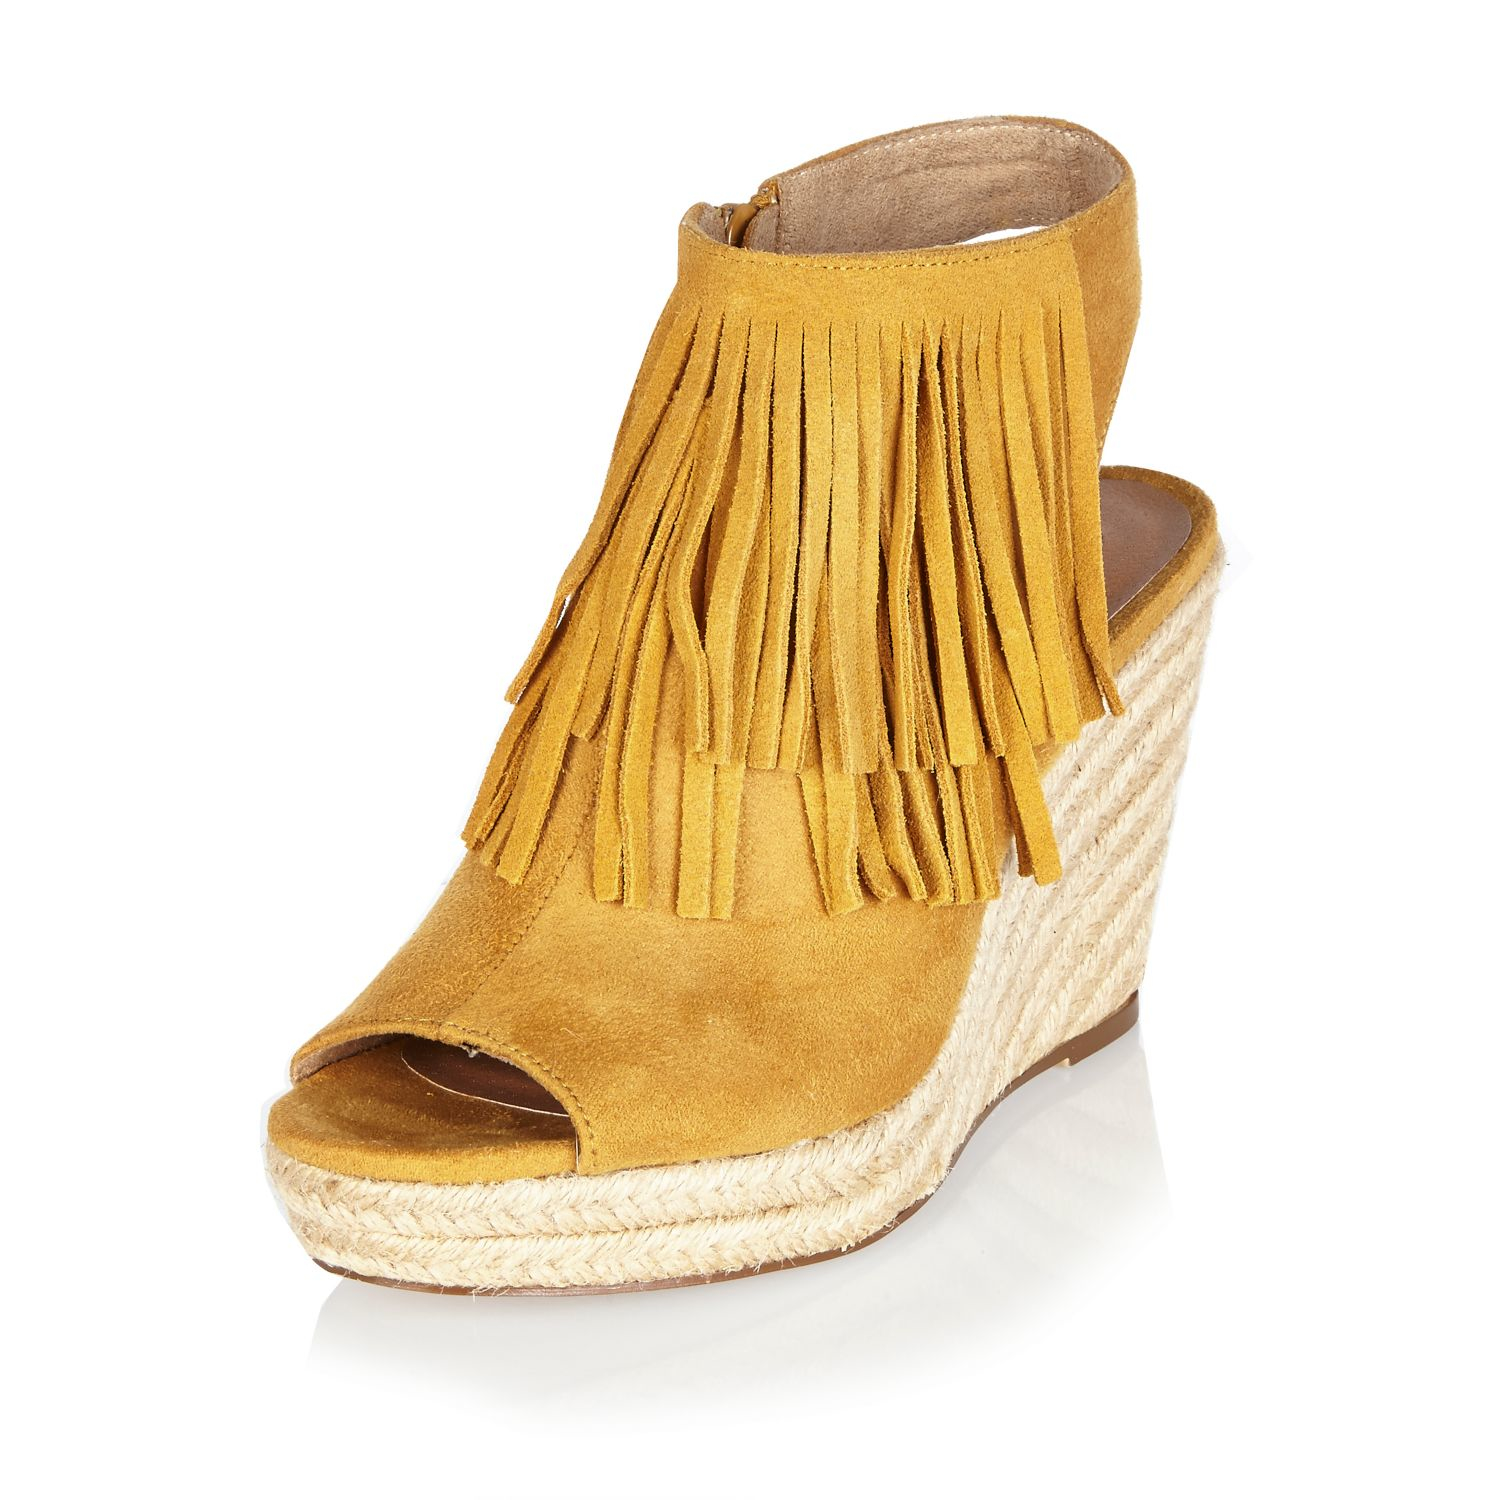 River Island Yellow Fringed Slingback Wedges in Yellow - Lyst